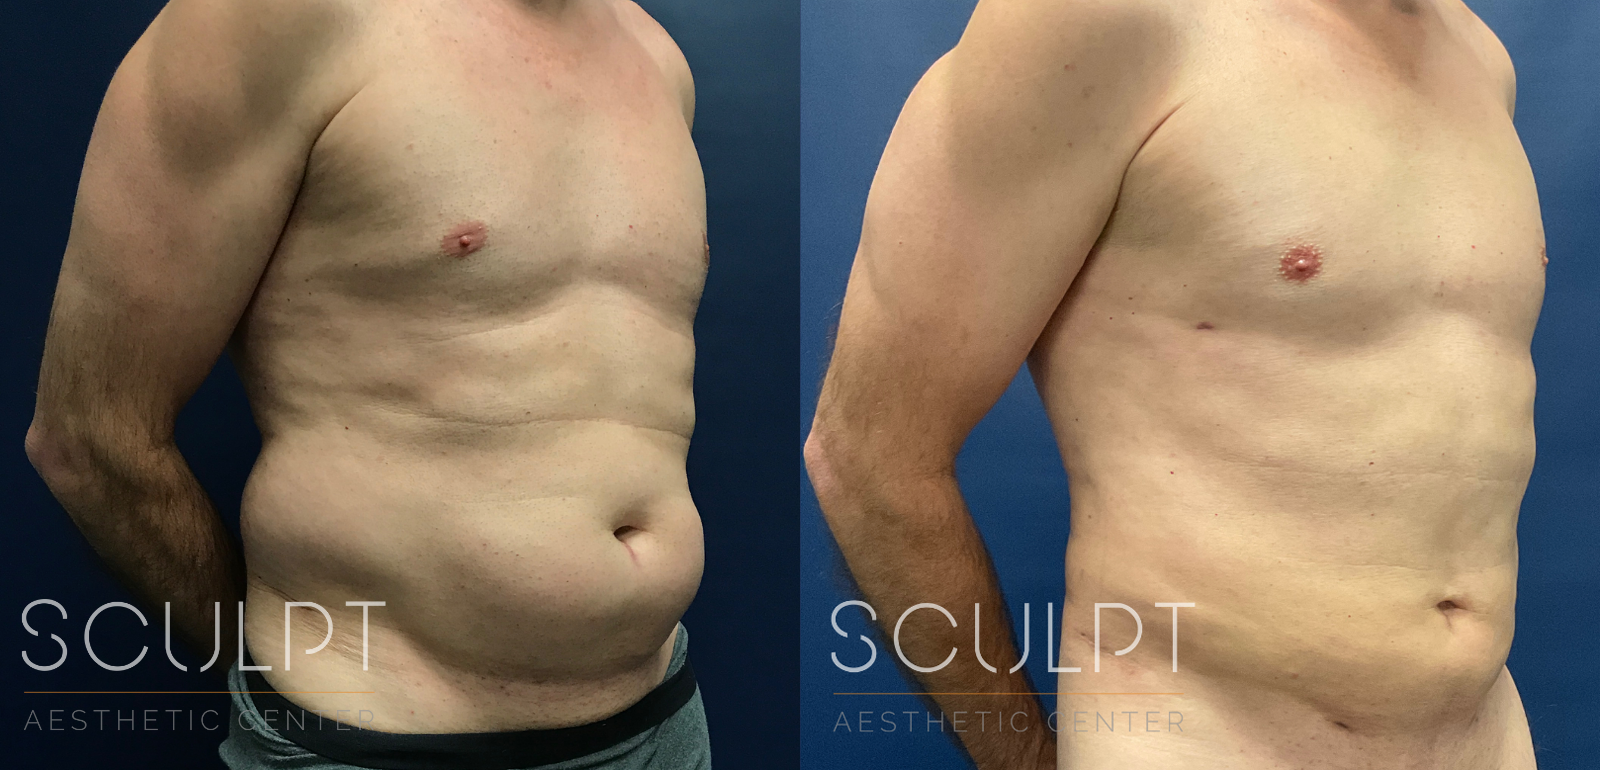 Liposuction to the Abdomen, Flanks, Back Before and After Photo by Sculpt Aesthetic Center in Frisco, TX